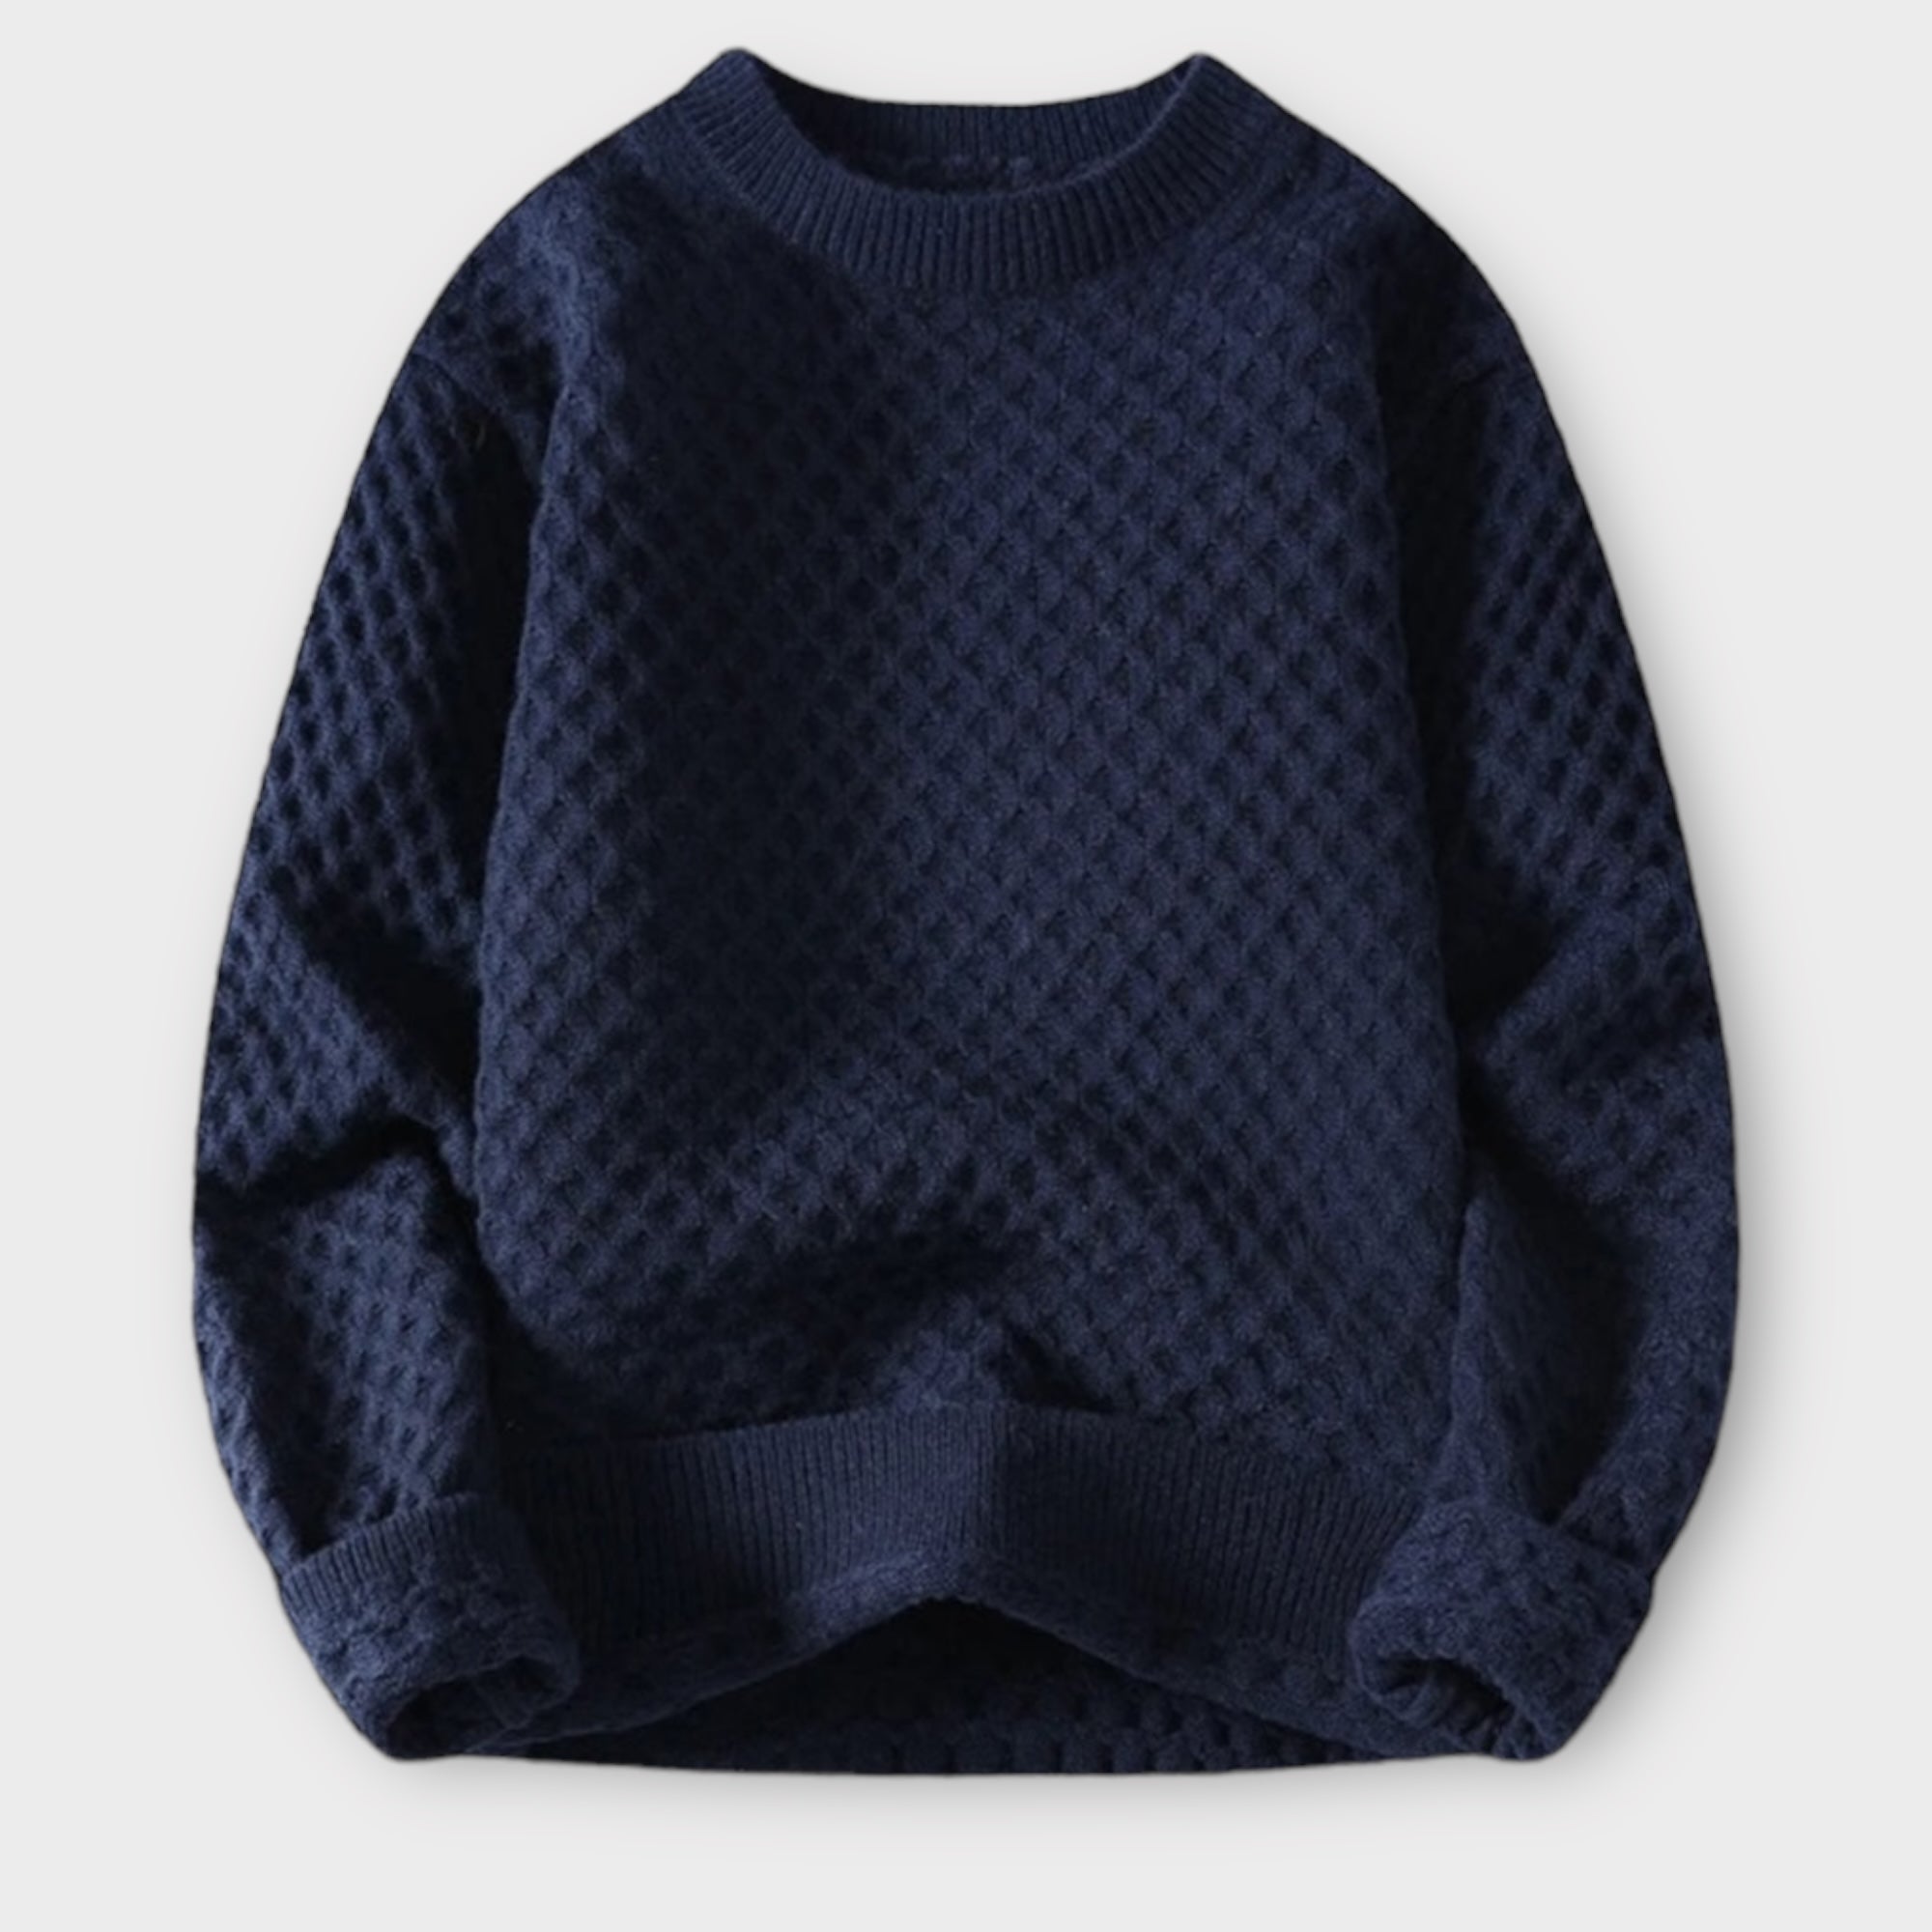 'DSFE' New knitted sweater one color for men